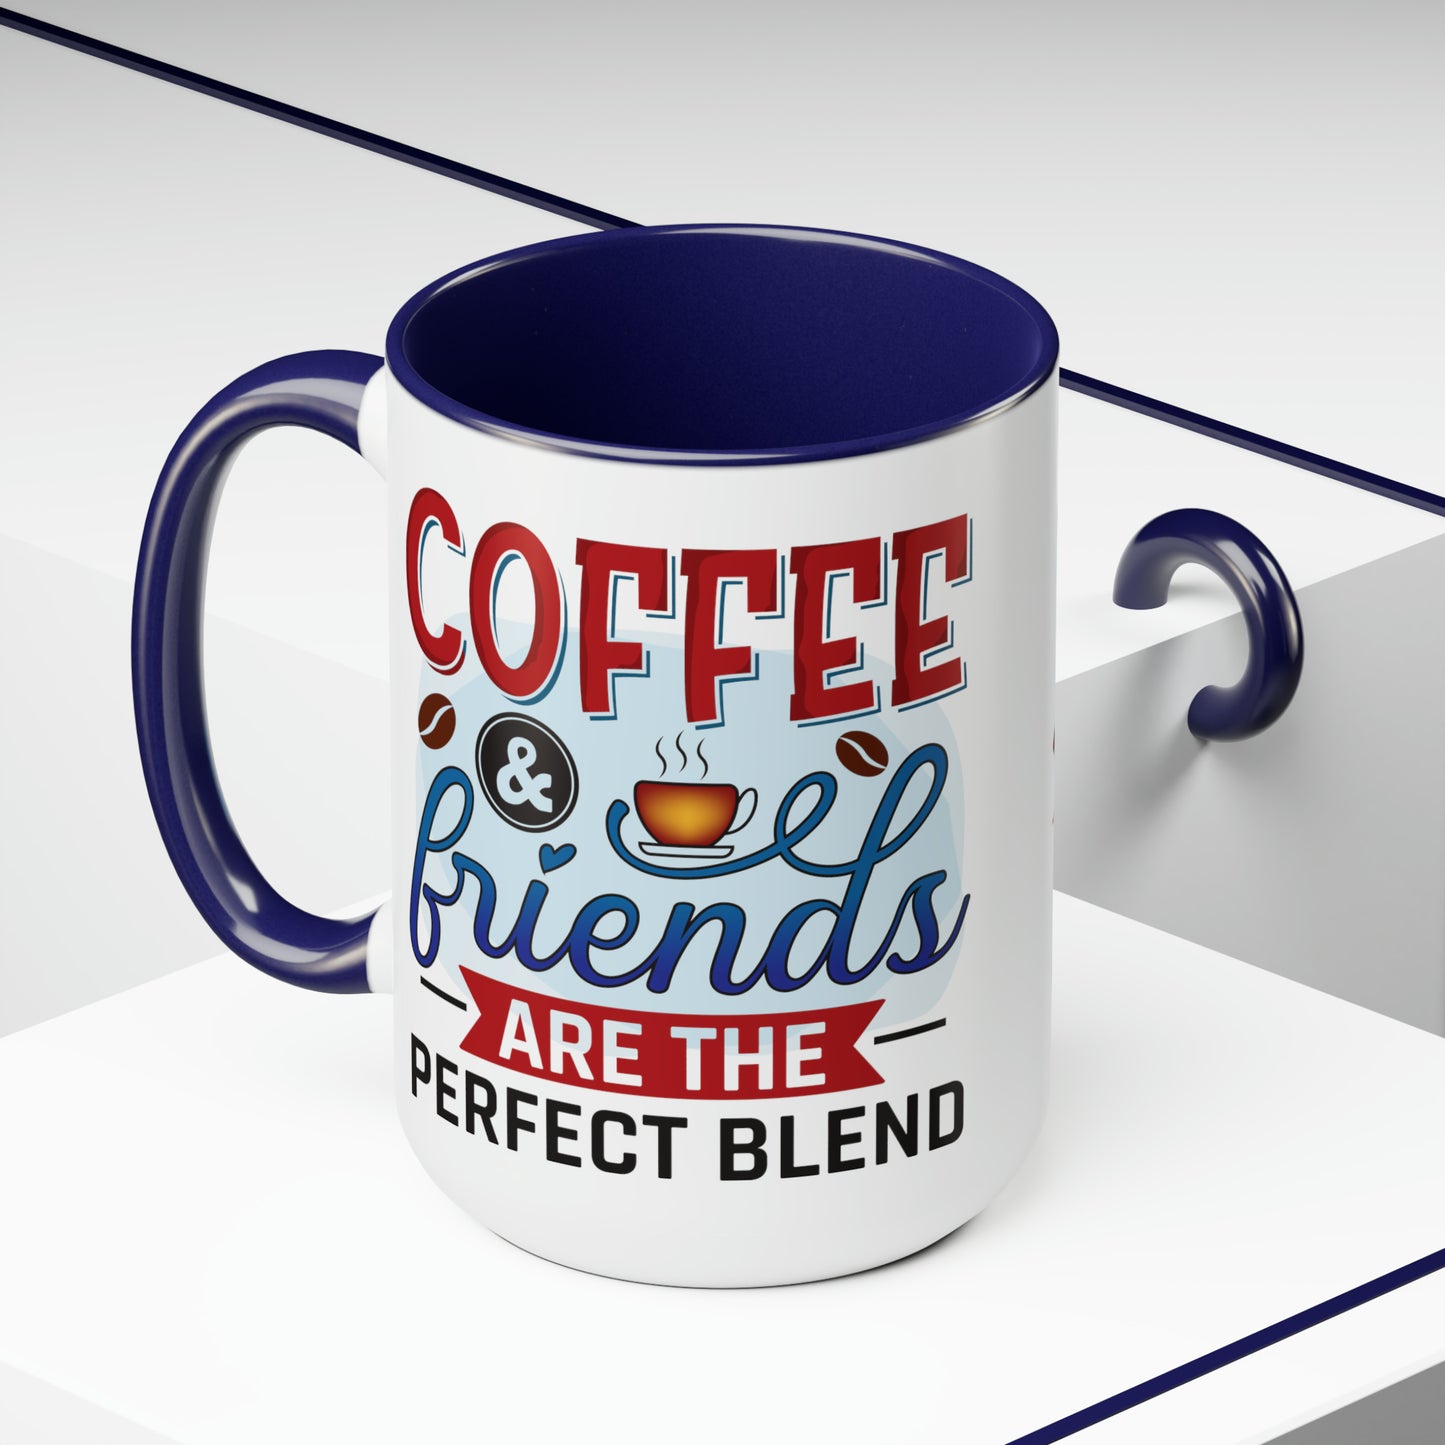 Coffee and Friends Are The Perfect Blend Two-Tone Coffee Mugs, 15oz, Coffee Mug, Coffee Cup, Drink Mug, Gifts For Friends, Friend Gift